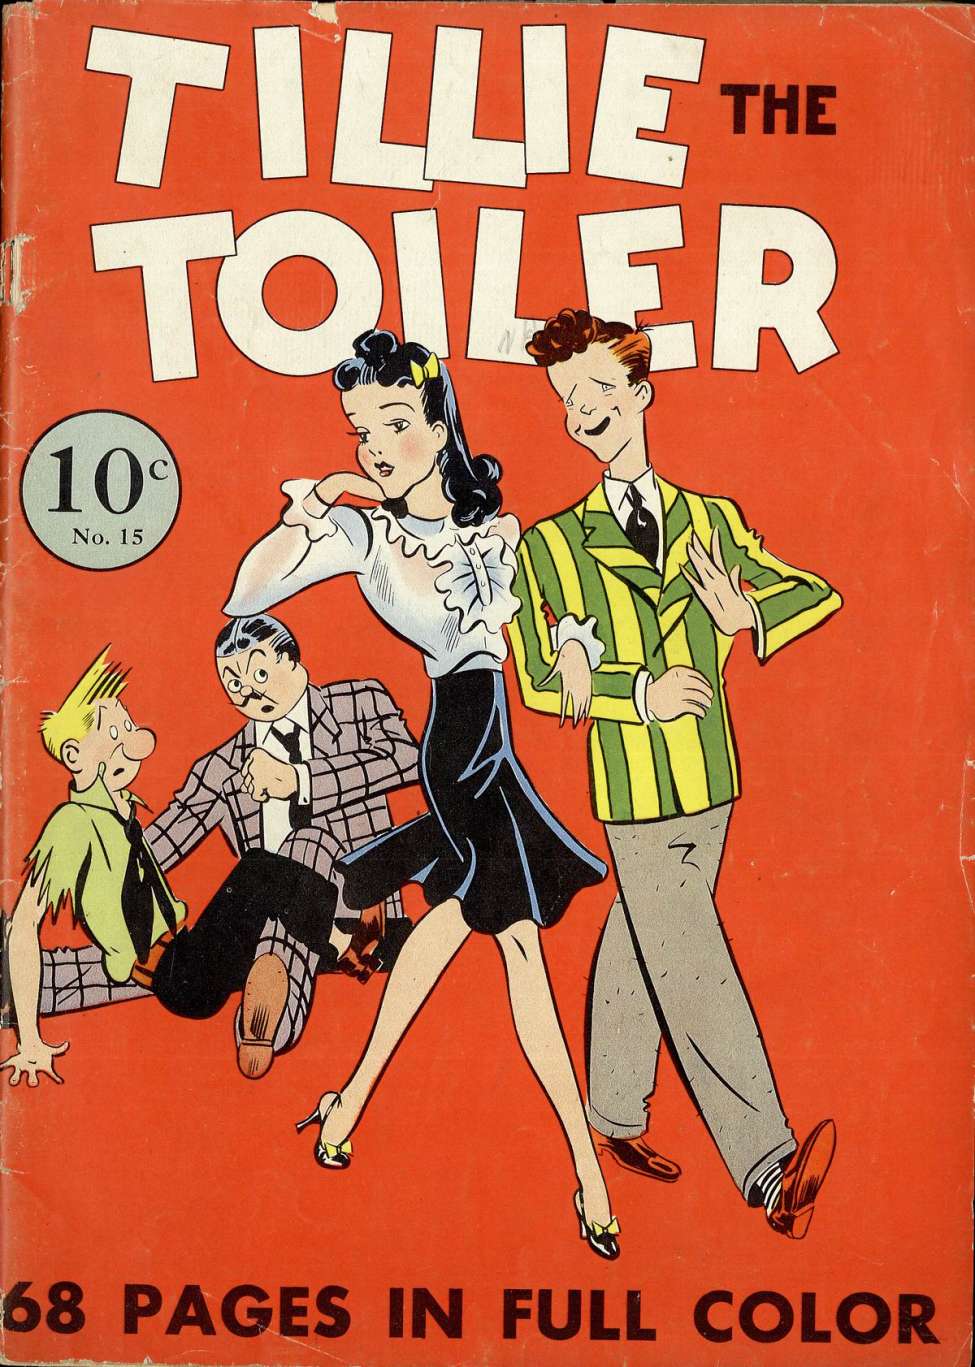 Comic Book Cover For 15 - Tillie the Toiler